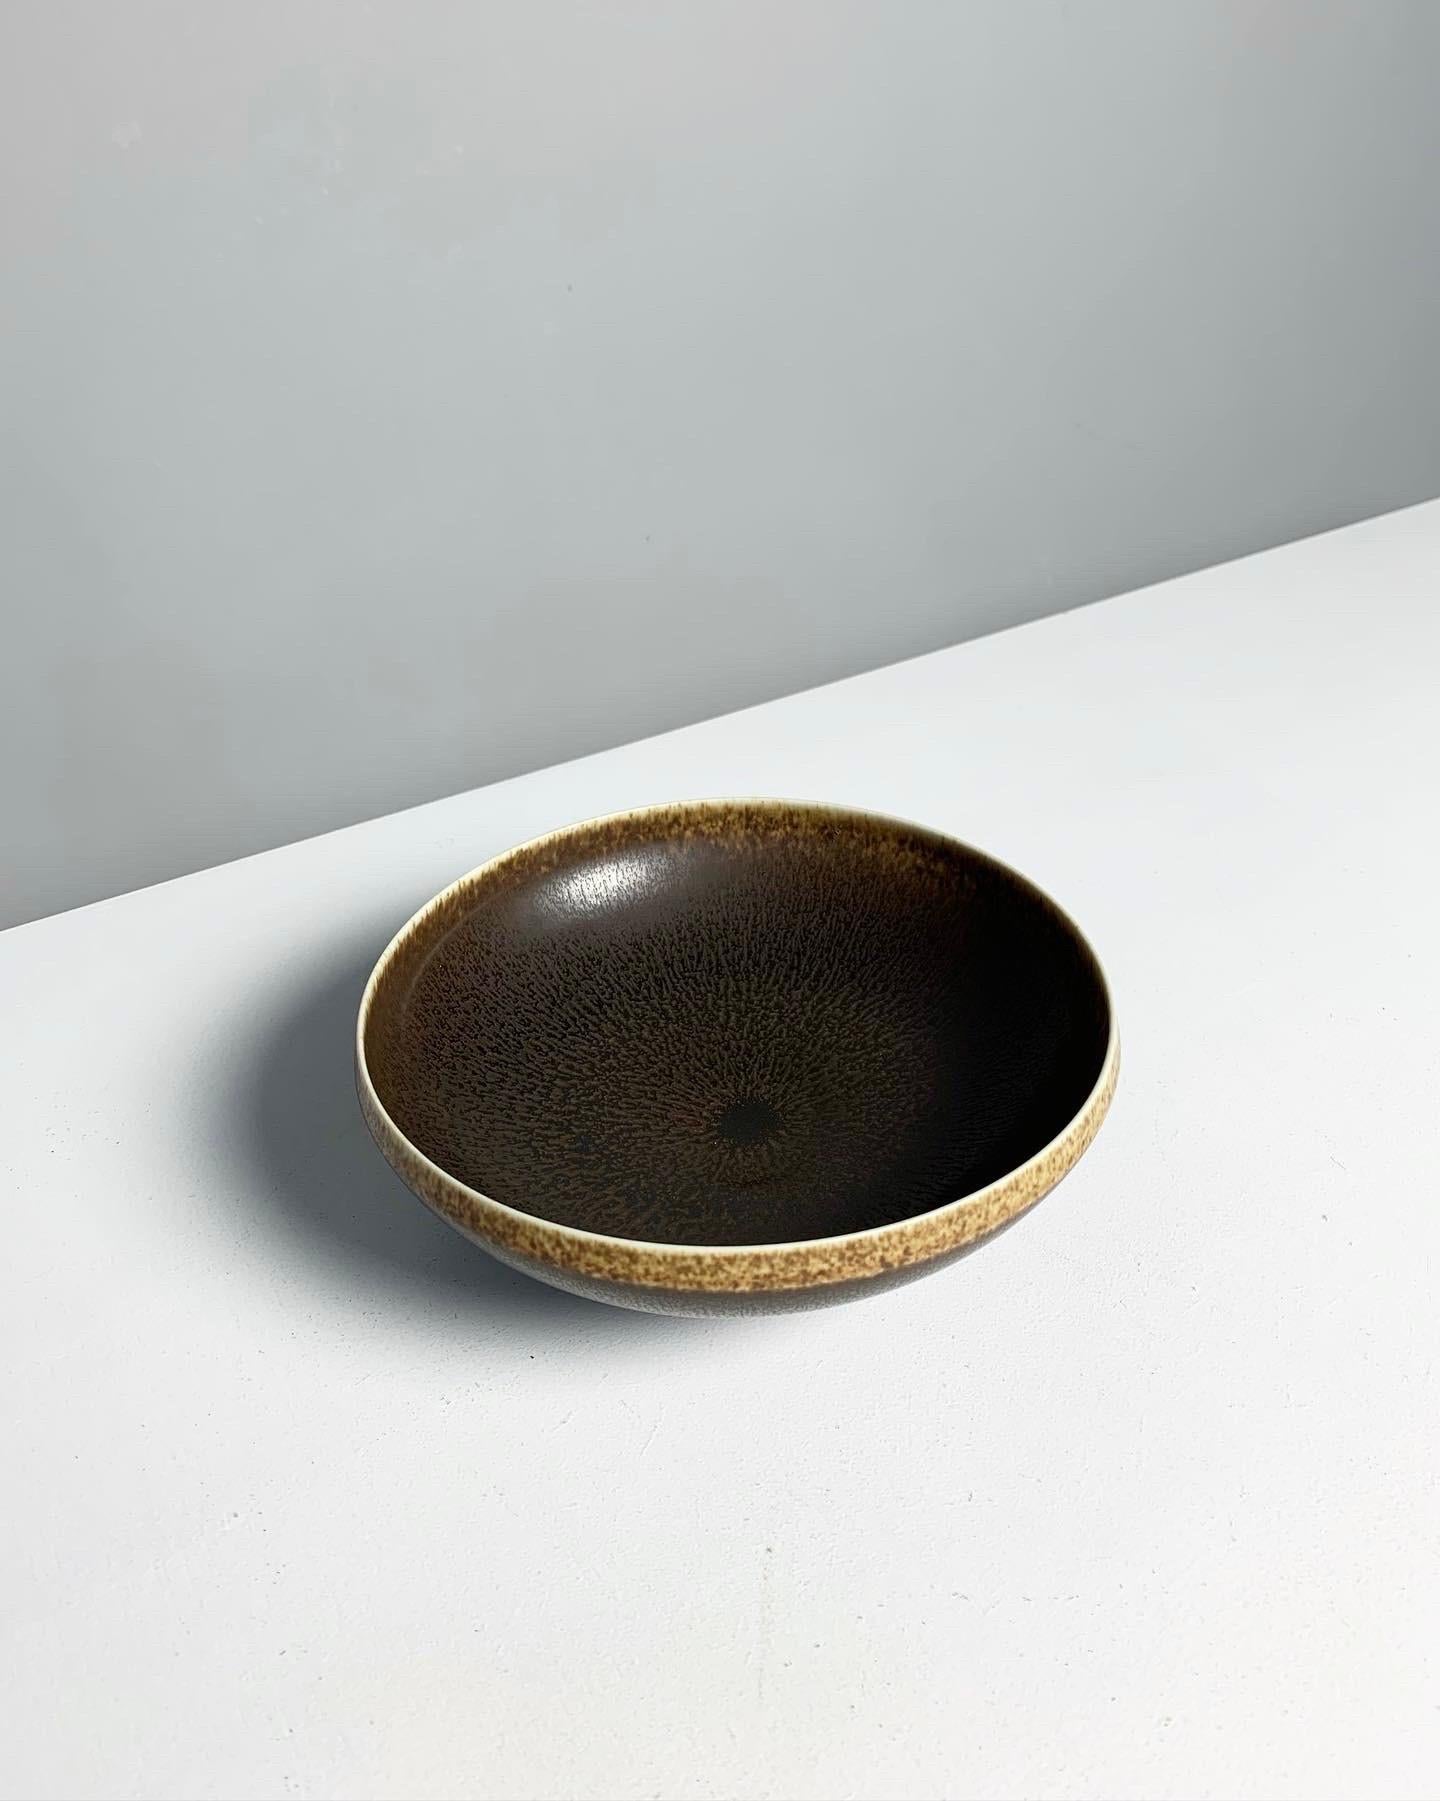 Berndt Friberg bowl in brown hare‘s fur glaze, signed with the letter „d“, hand-crafted at his studio in 1962 at Gustavsberg factory.

Measures: diameter: 15 cm
Height: 5 cm.
 